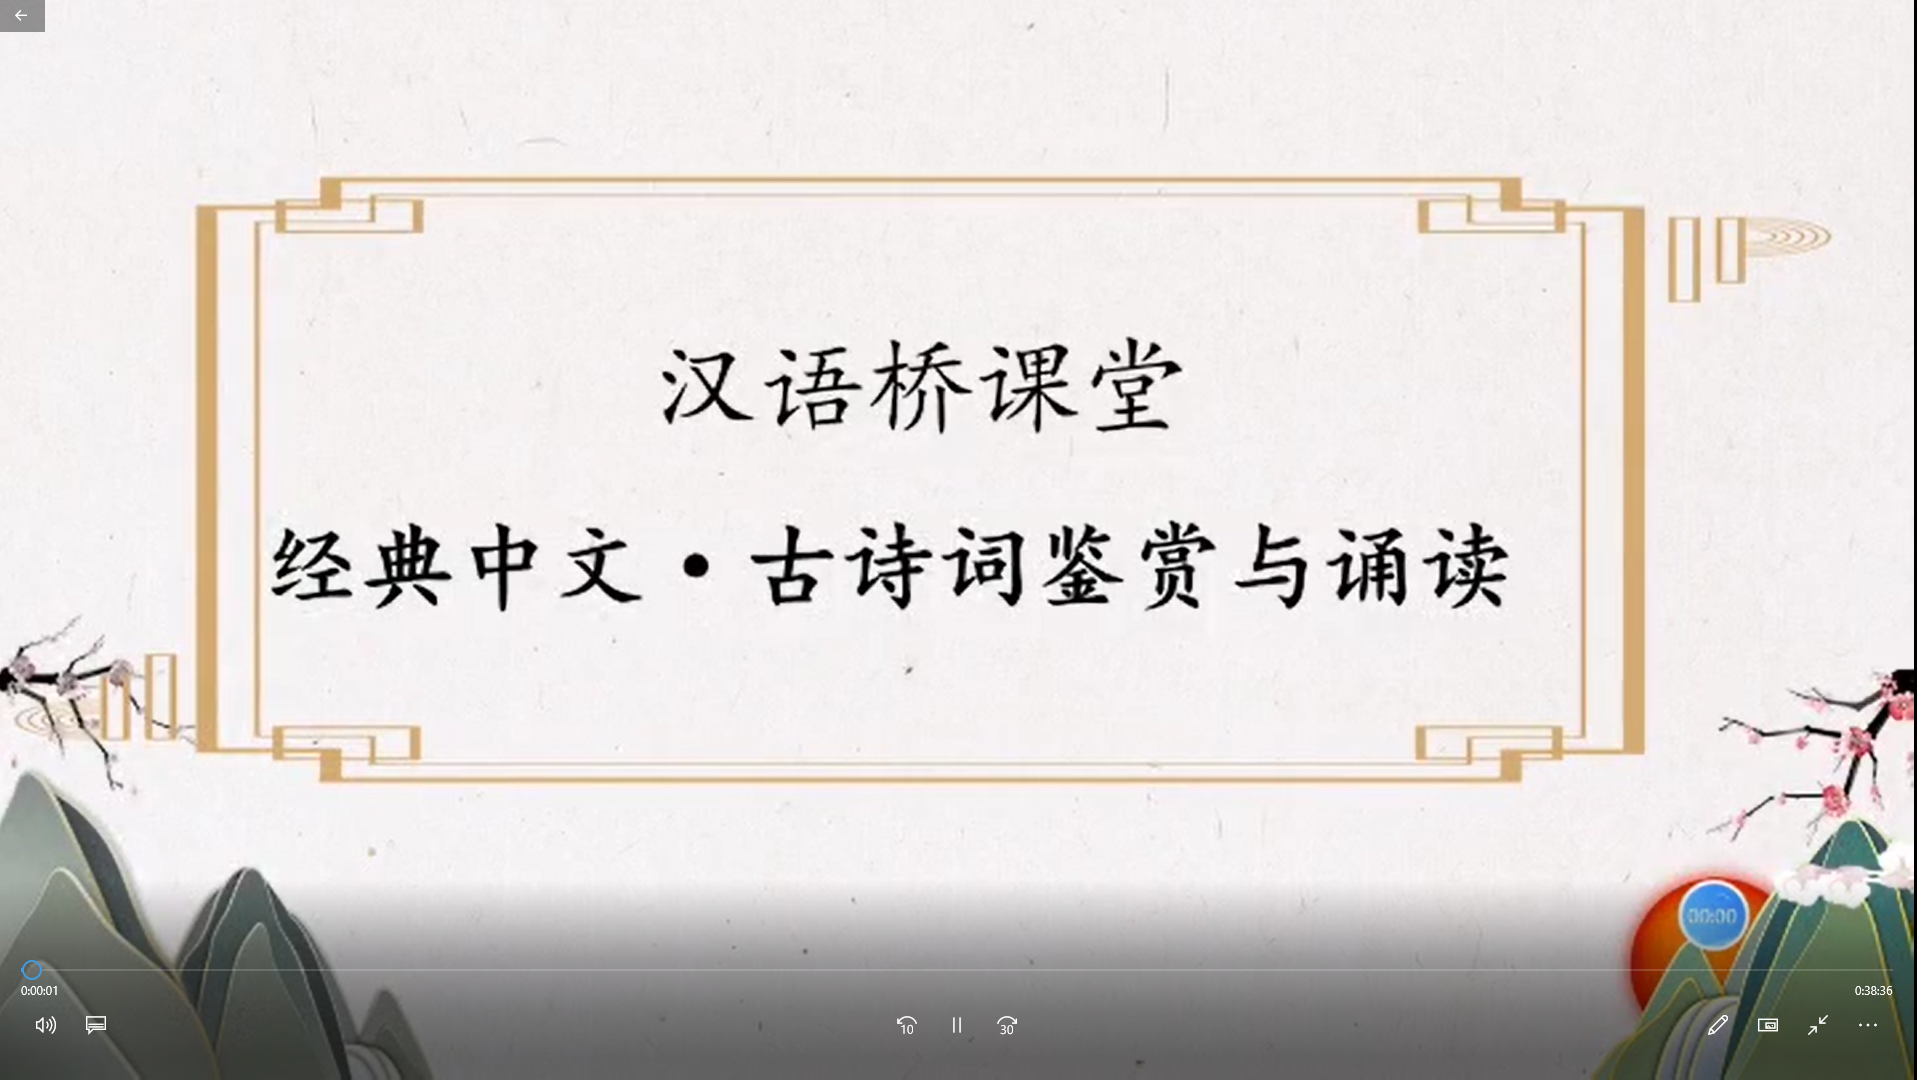 Appreciation and reading of classical Chinese ancient poetry2